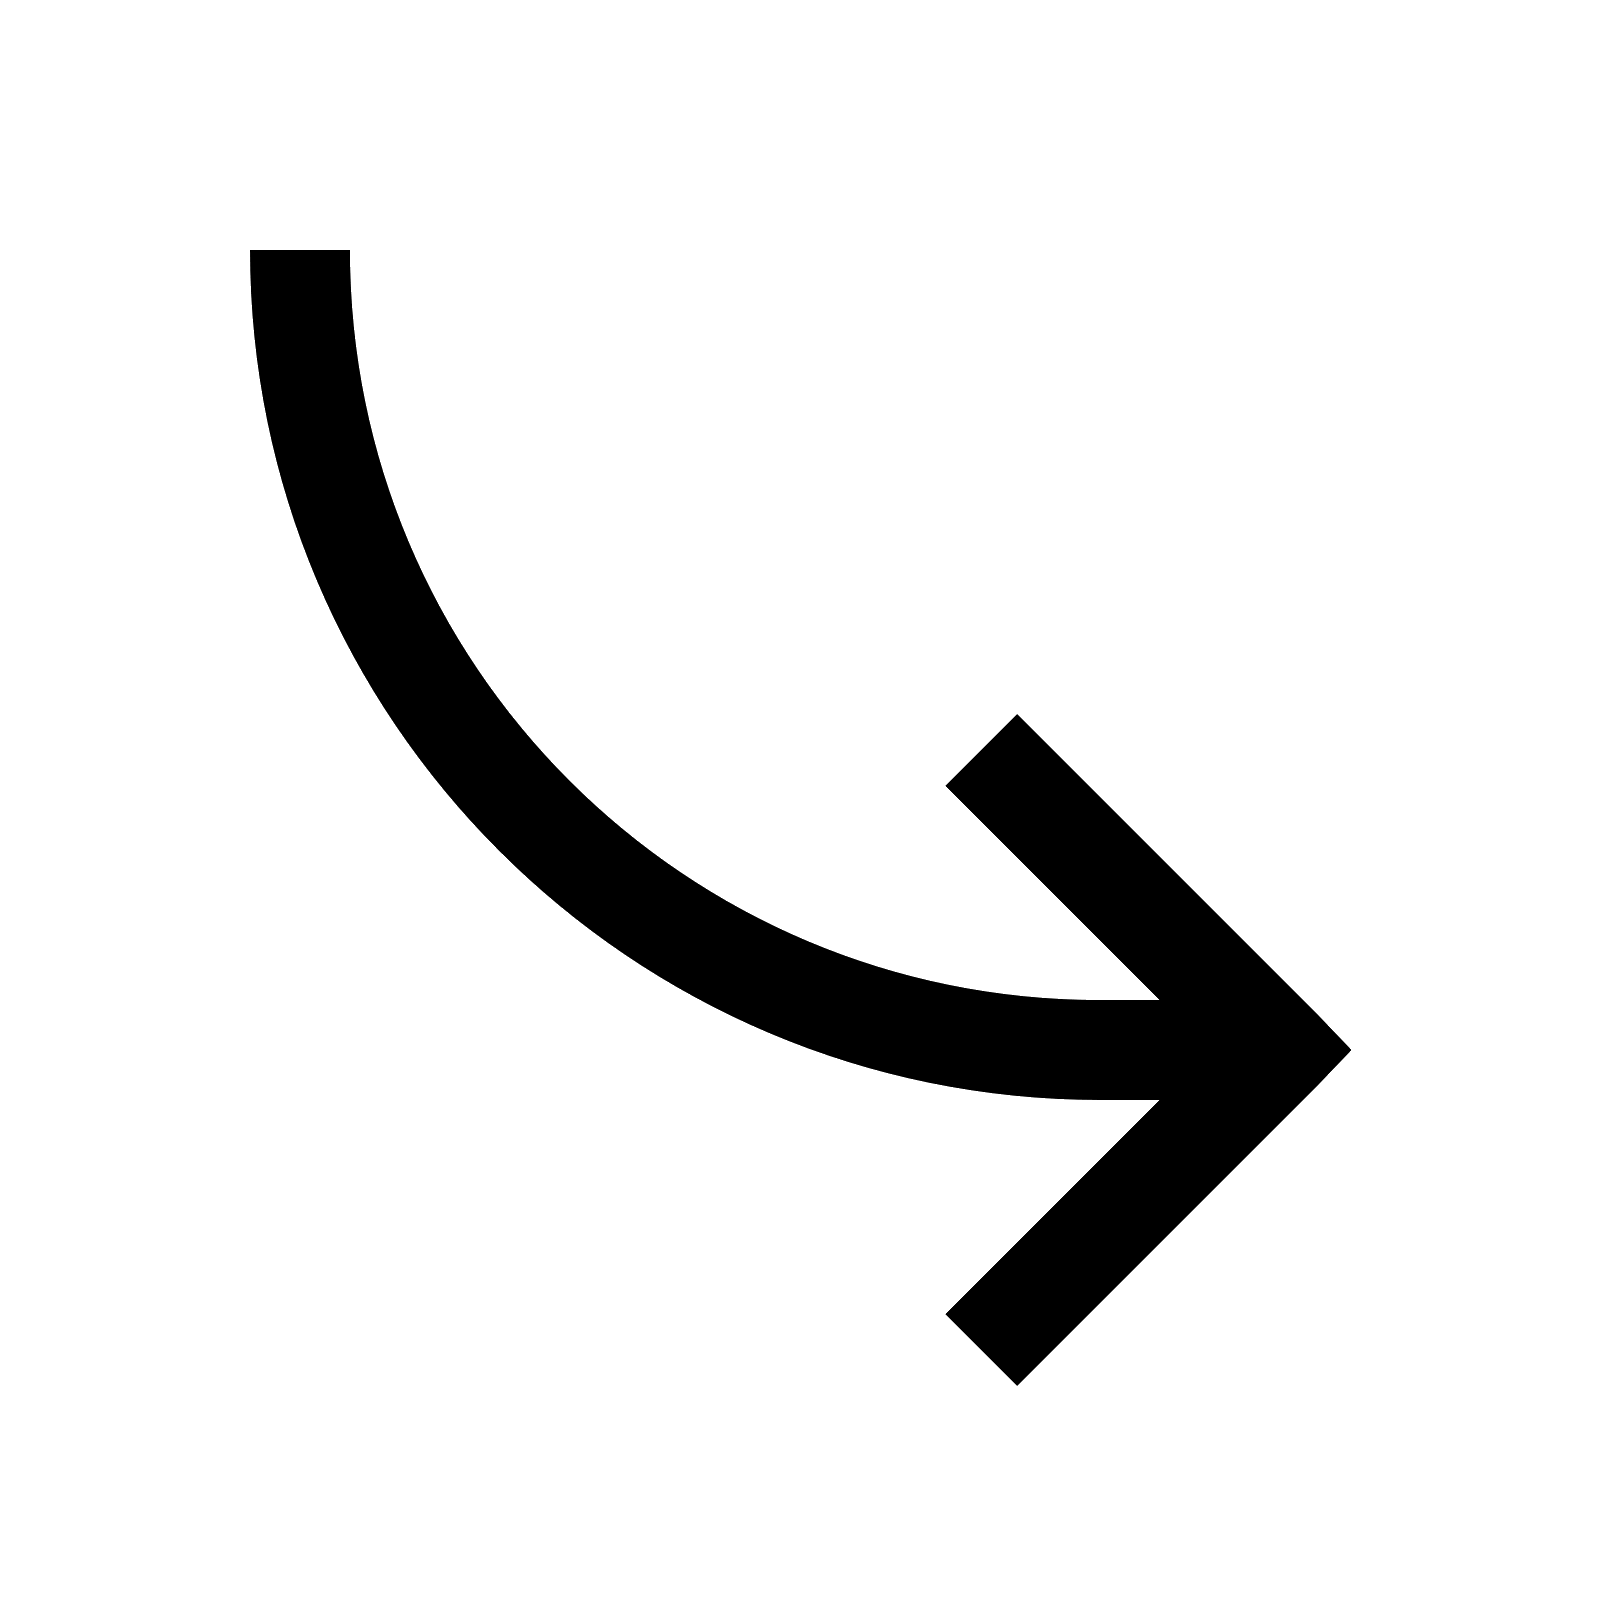 Black and White Curved Arrow Logo - Free Icon With A Curved Arrow 325888. Download Icon With A Curved